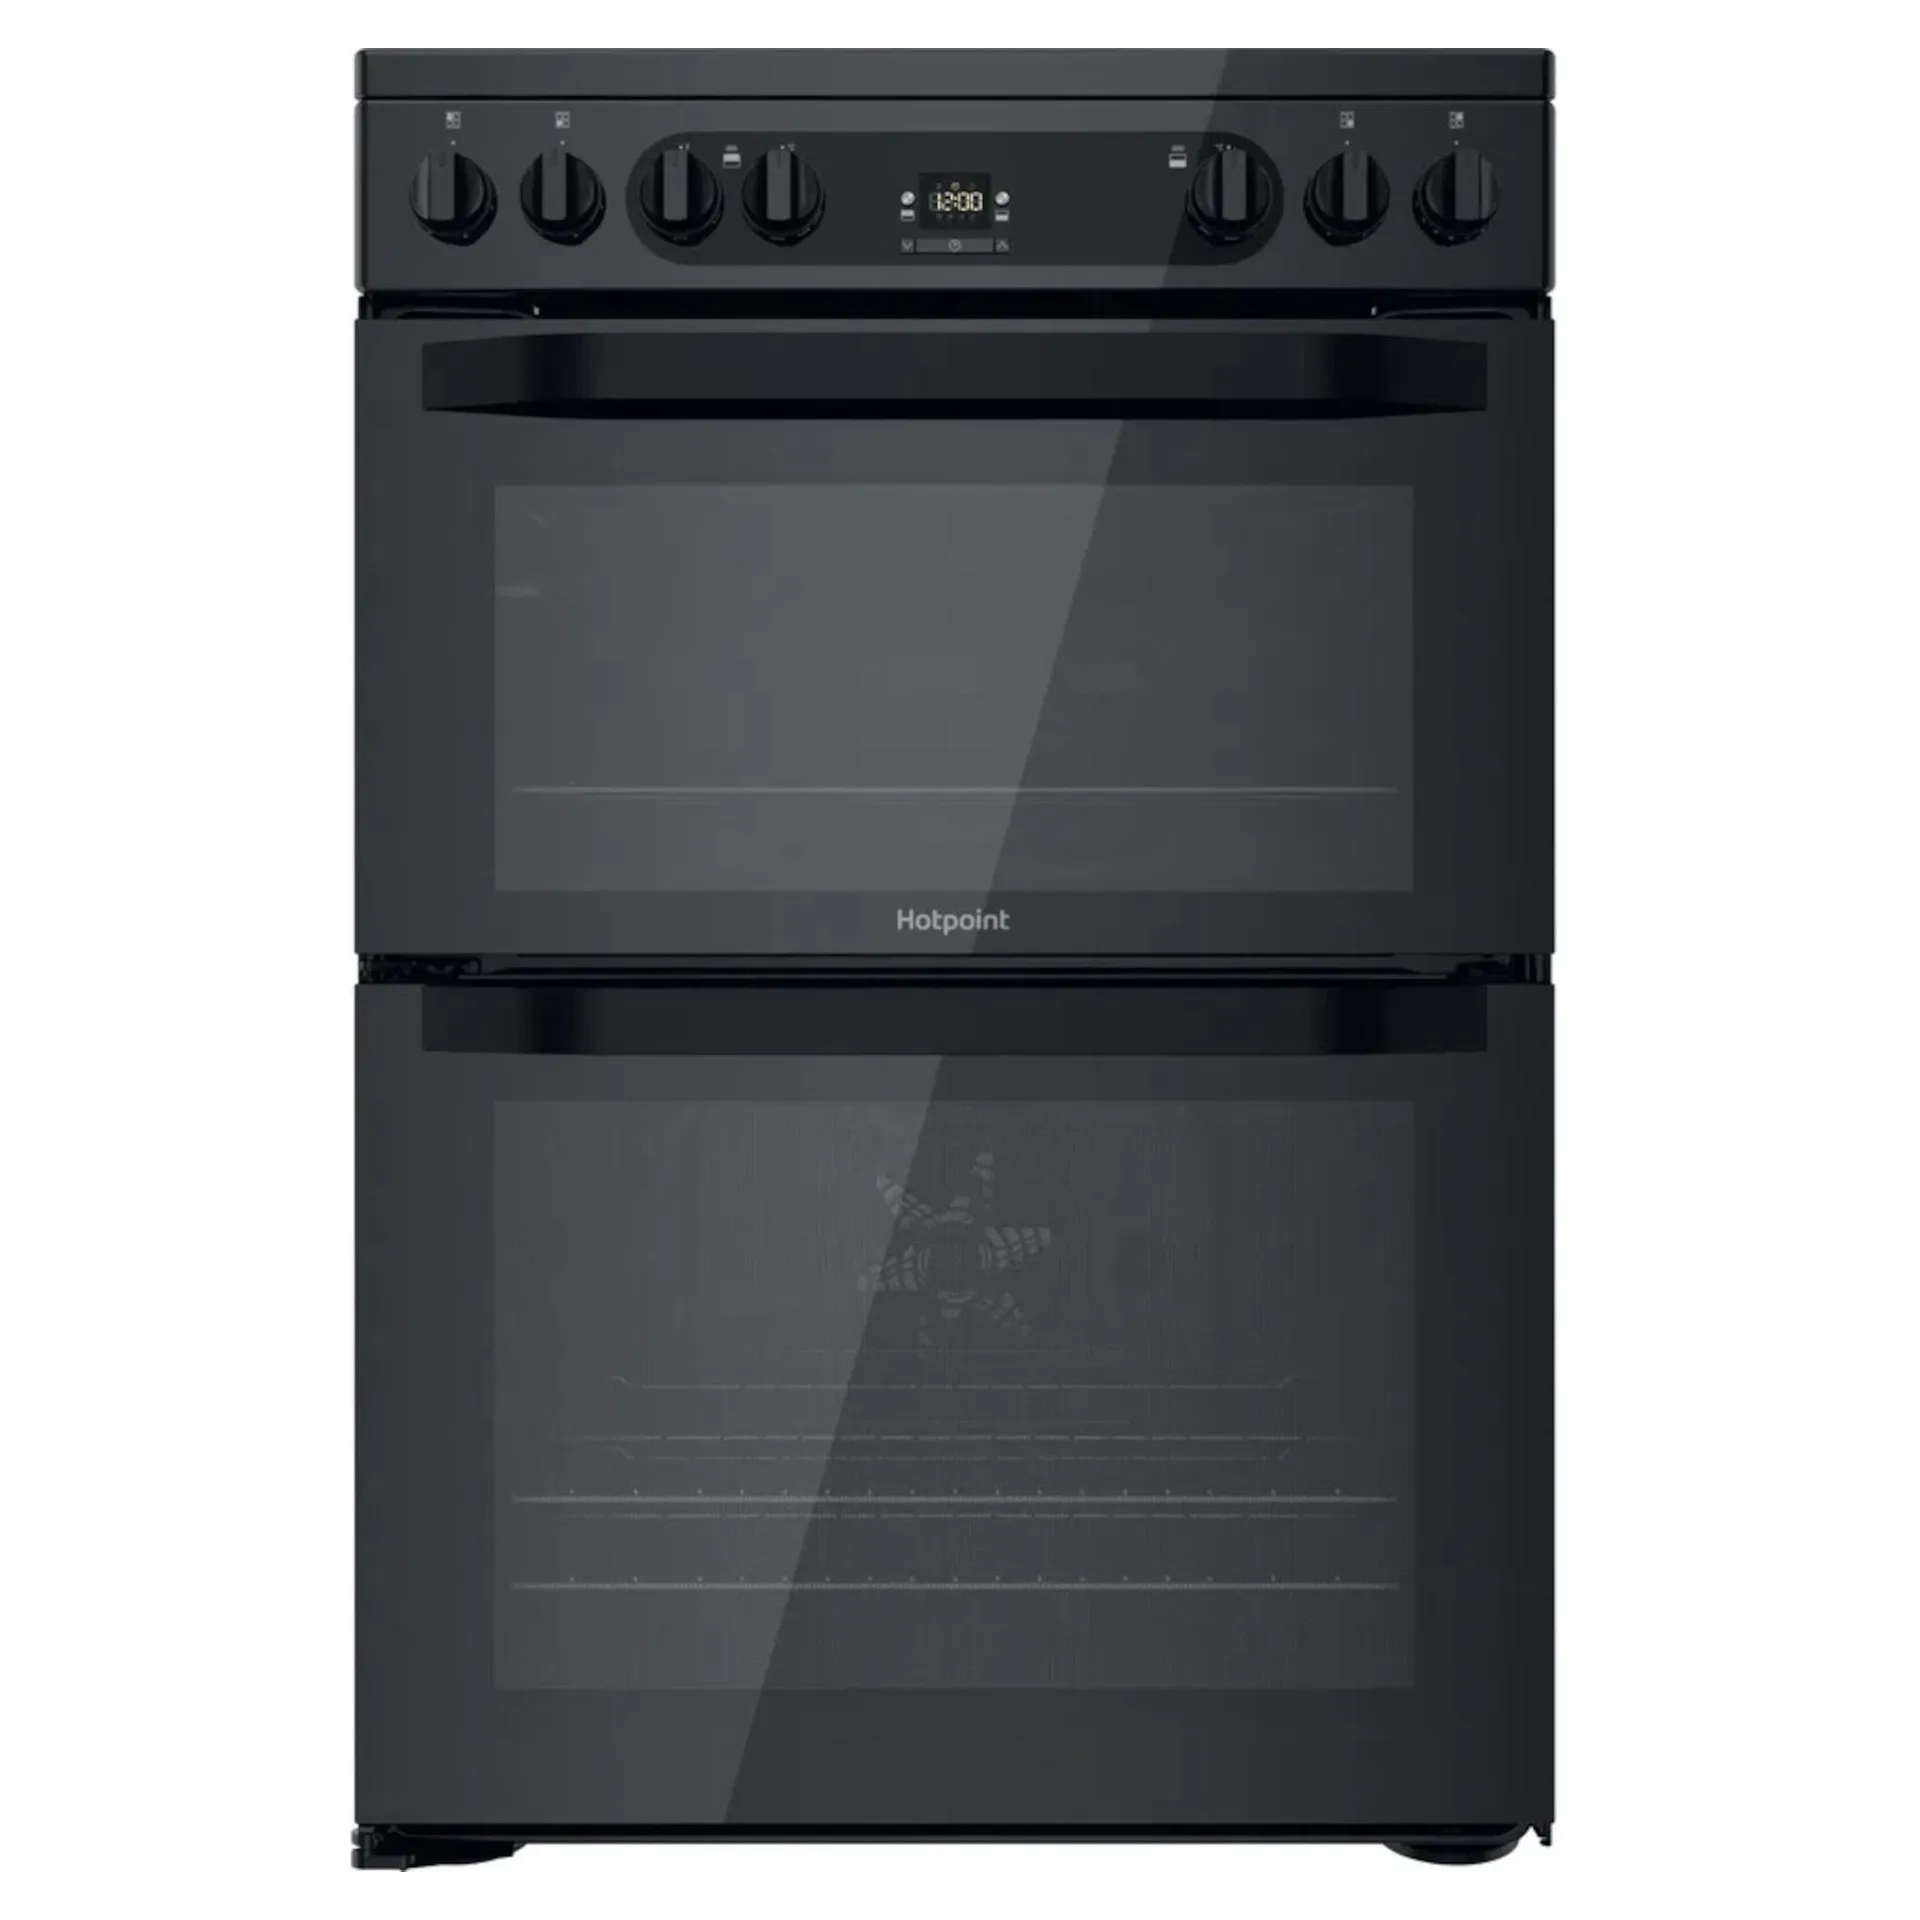 HDM67V92HCBUK Freestanding Electric Cooker with Ceramic Hob